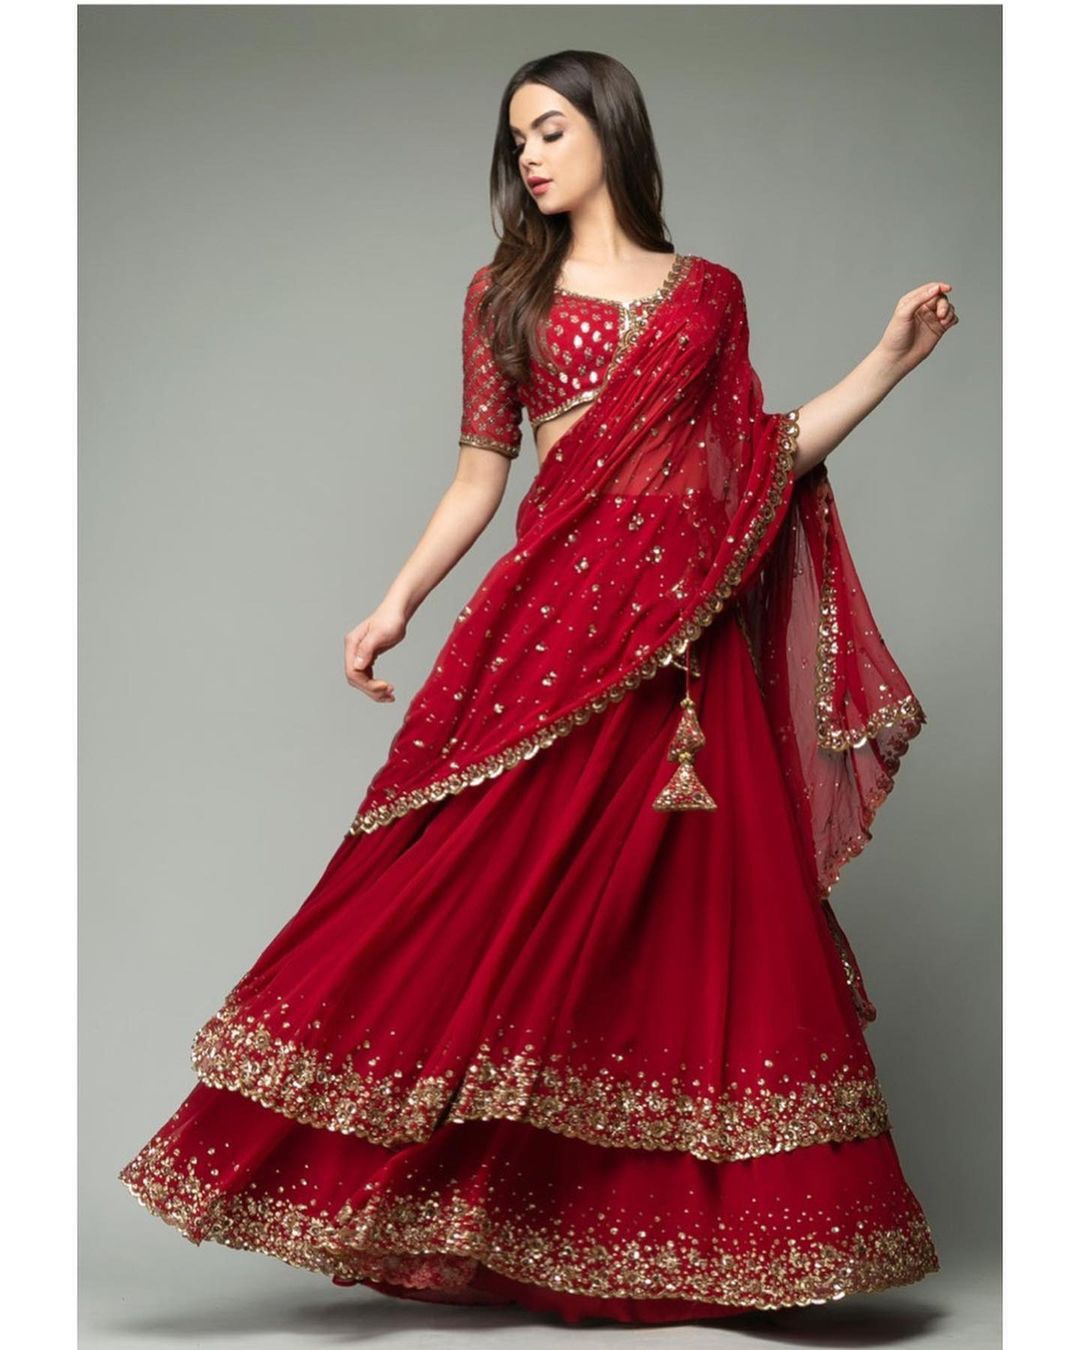 Organza-silk double layered Lehenga and beautiful embroidered blouse. |  Modest wear, Gowns dresses, Dresses